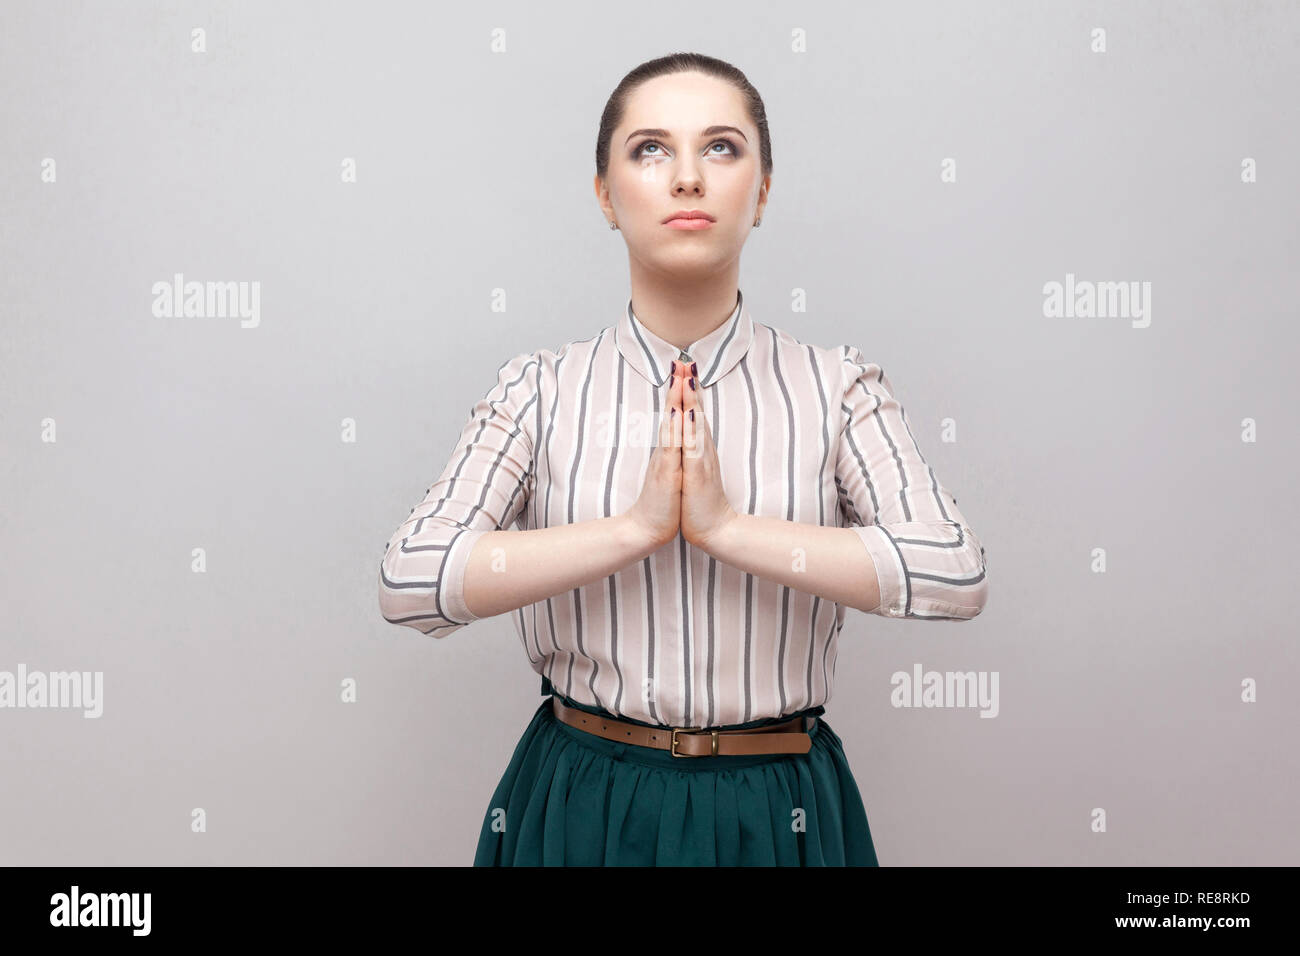 Portrait of hopeful beautiful young woman in striped shirt and green skirt with makeup and collected ban hairstyle, standing, looking uo and praying.  Stock Photo